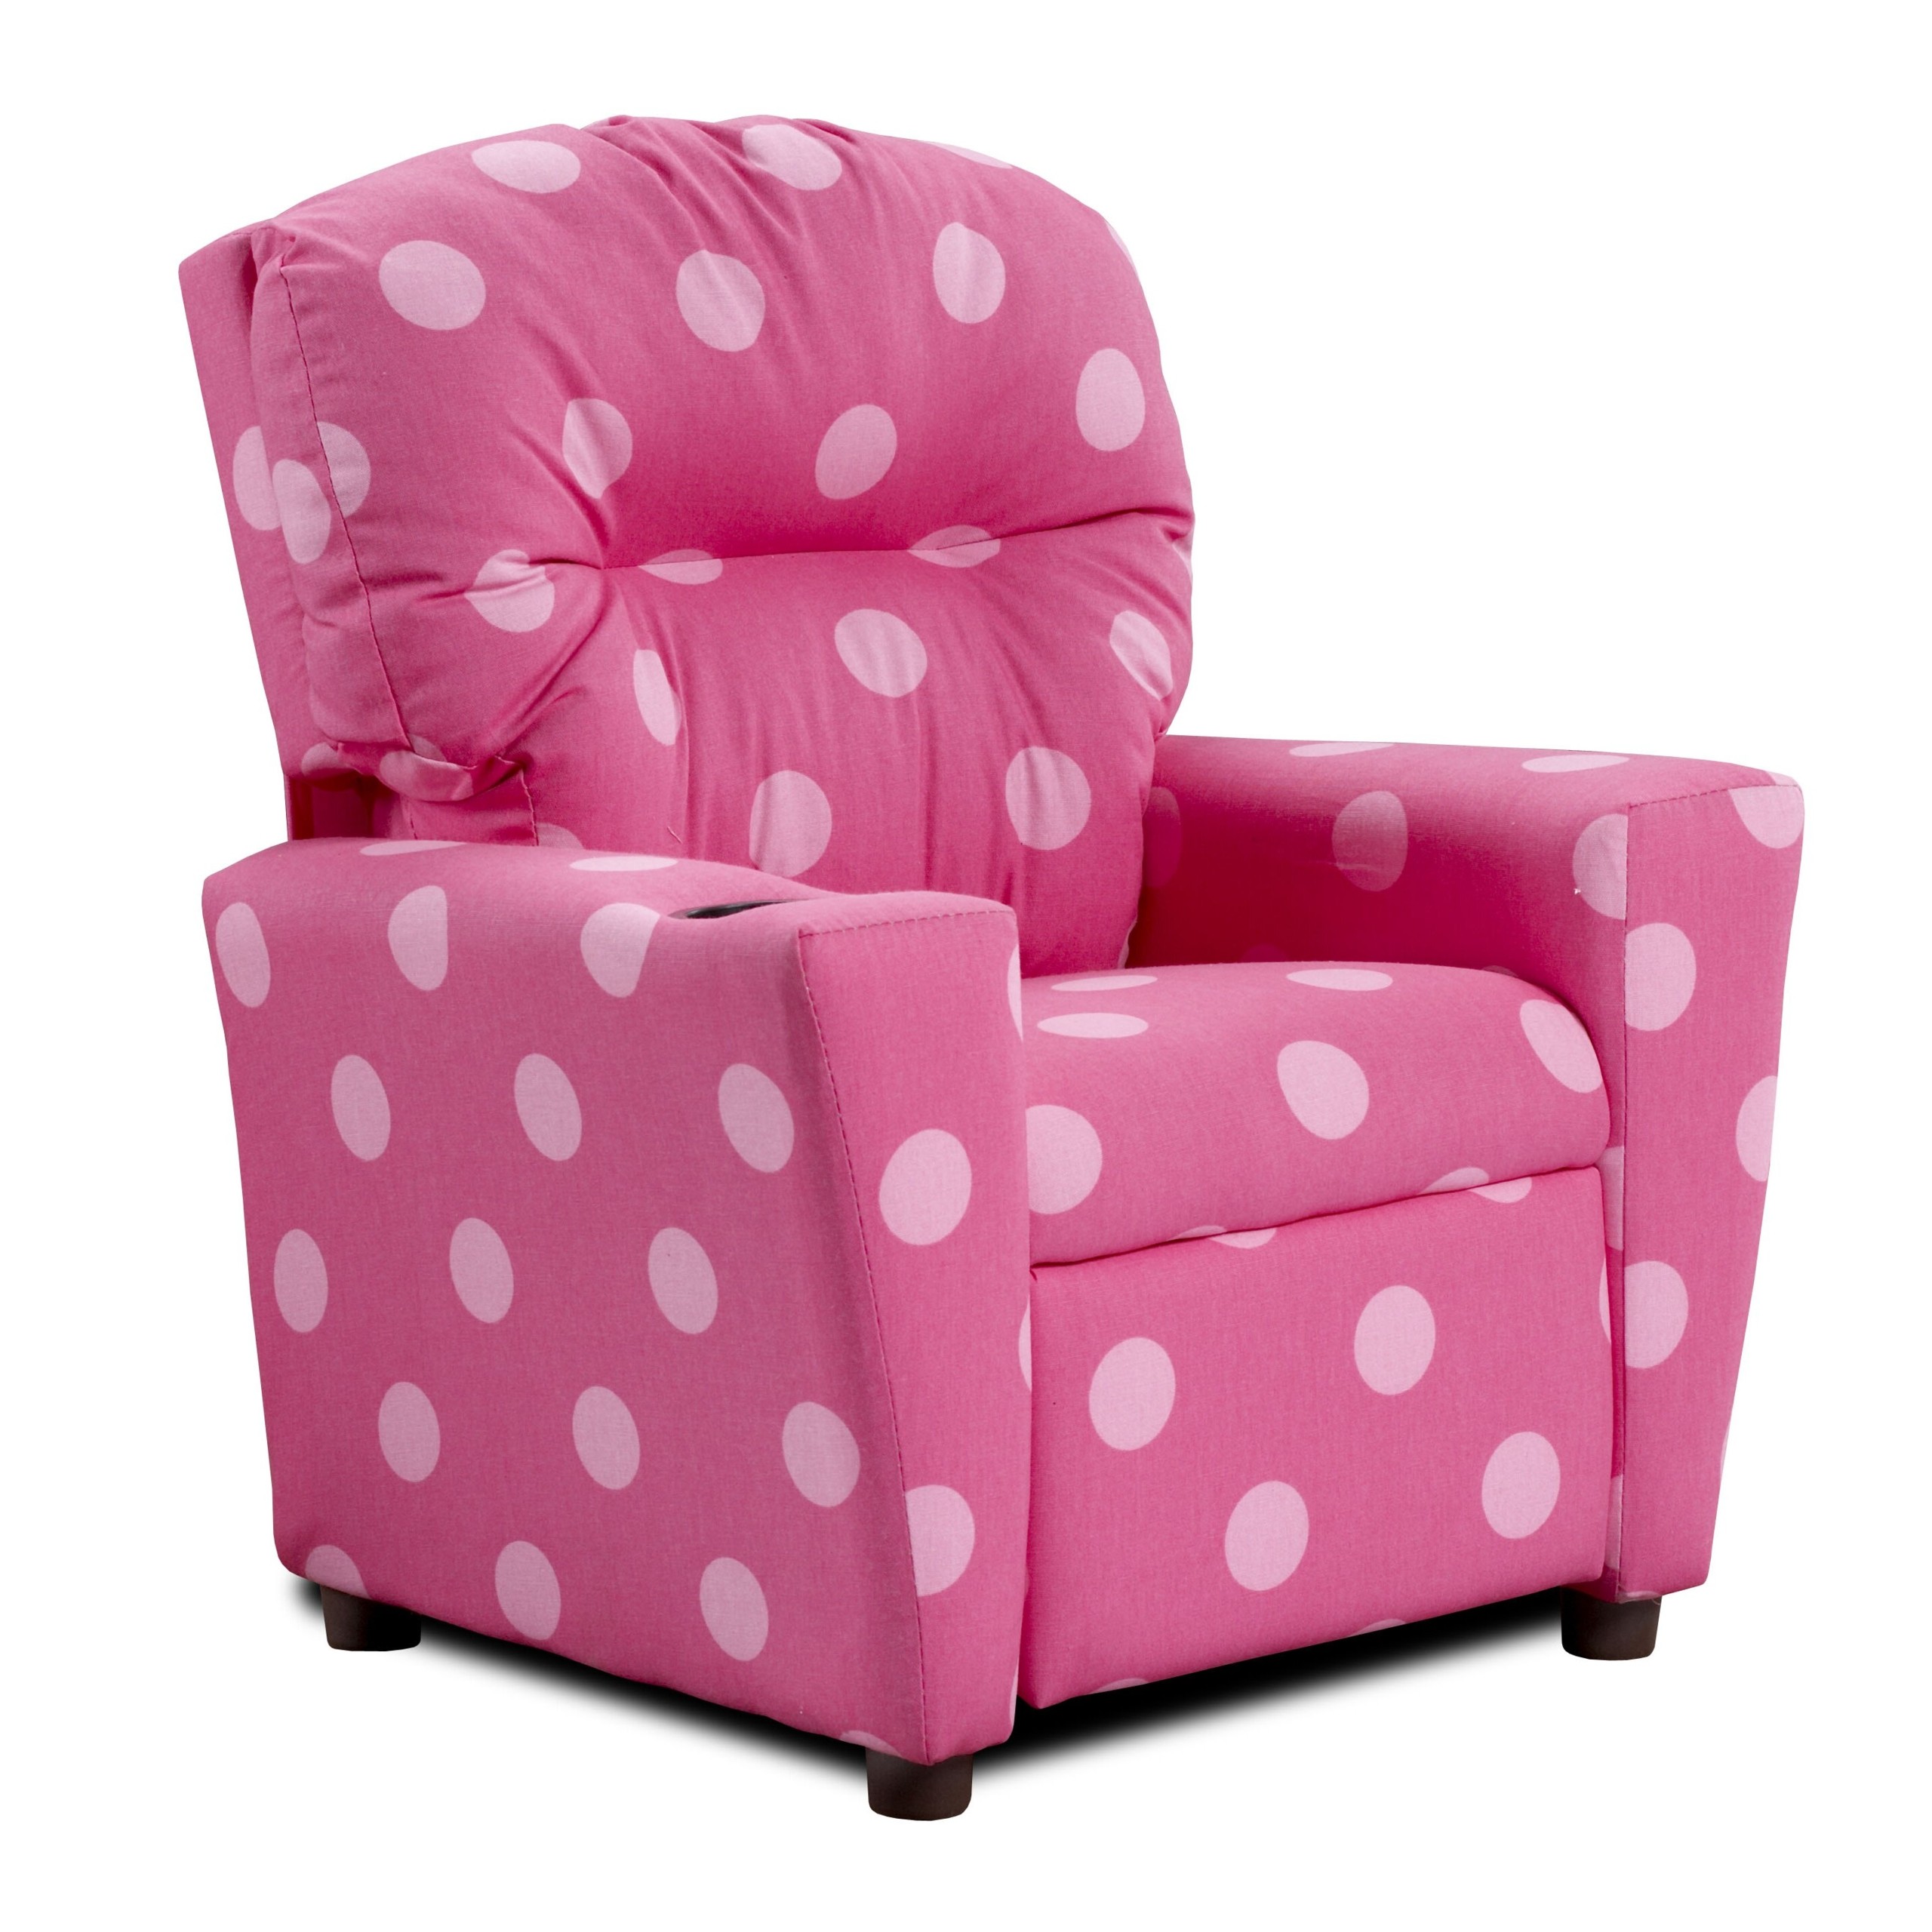 Designer Collection Kid's Recliner (Bright Candy Pink) (28"H x 24.5"W x 23"D)